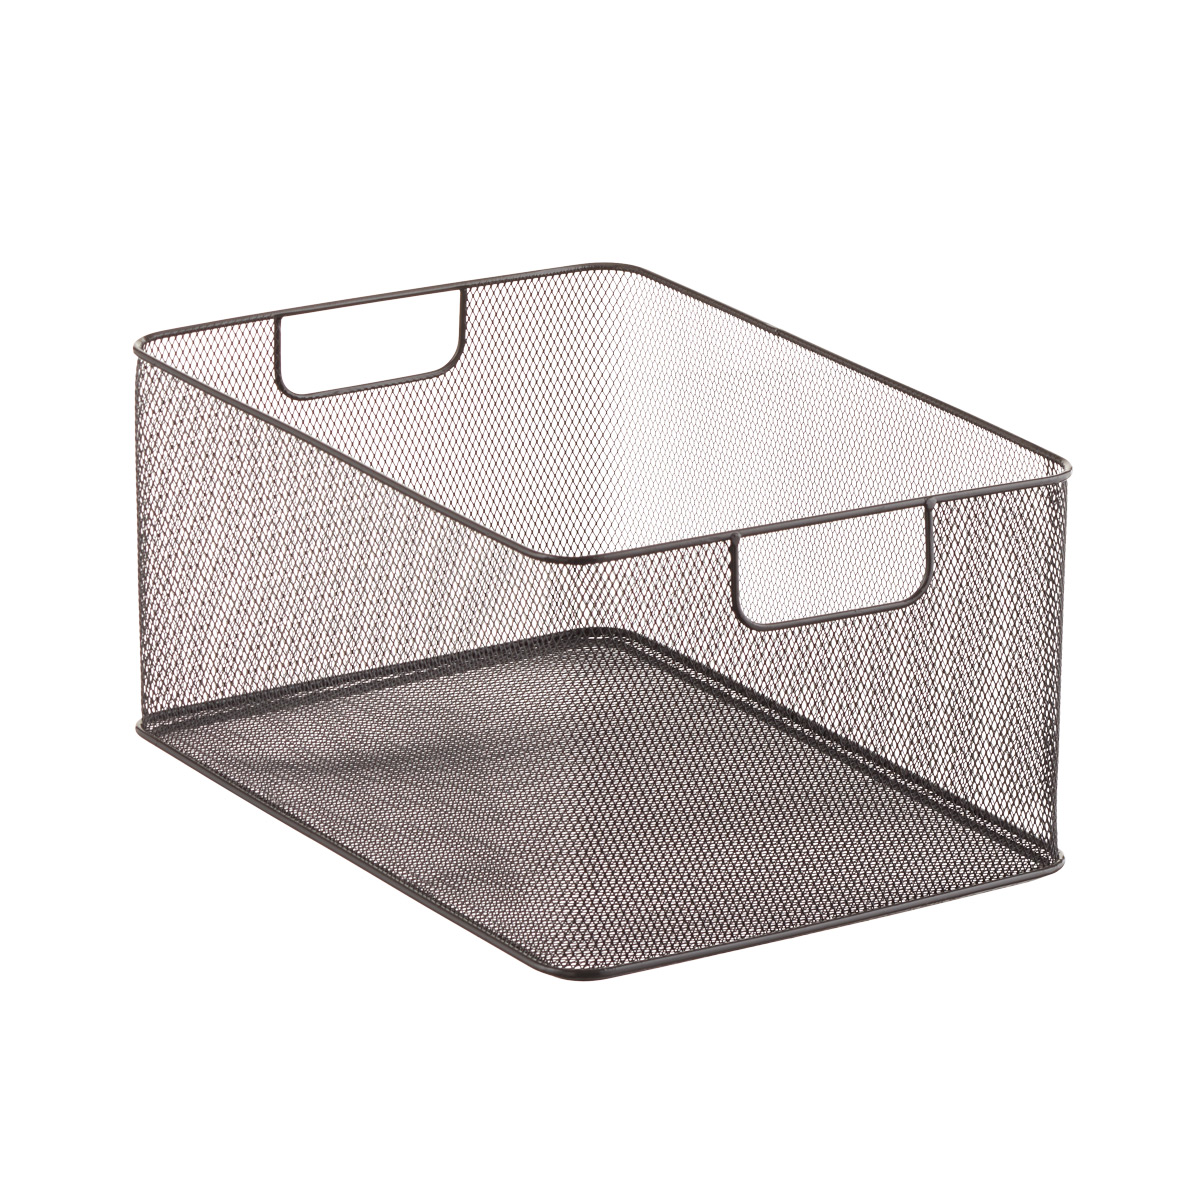 https://www.containerstore.com/catalogimages/476070/10090645-x-large-stacking-mesh-bin-g.jpg